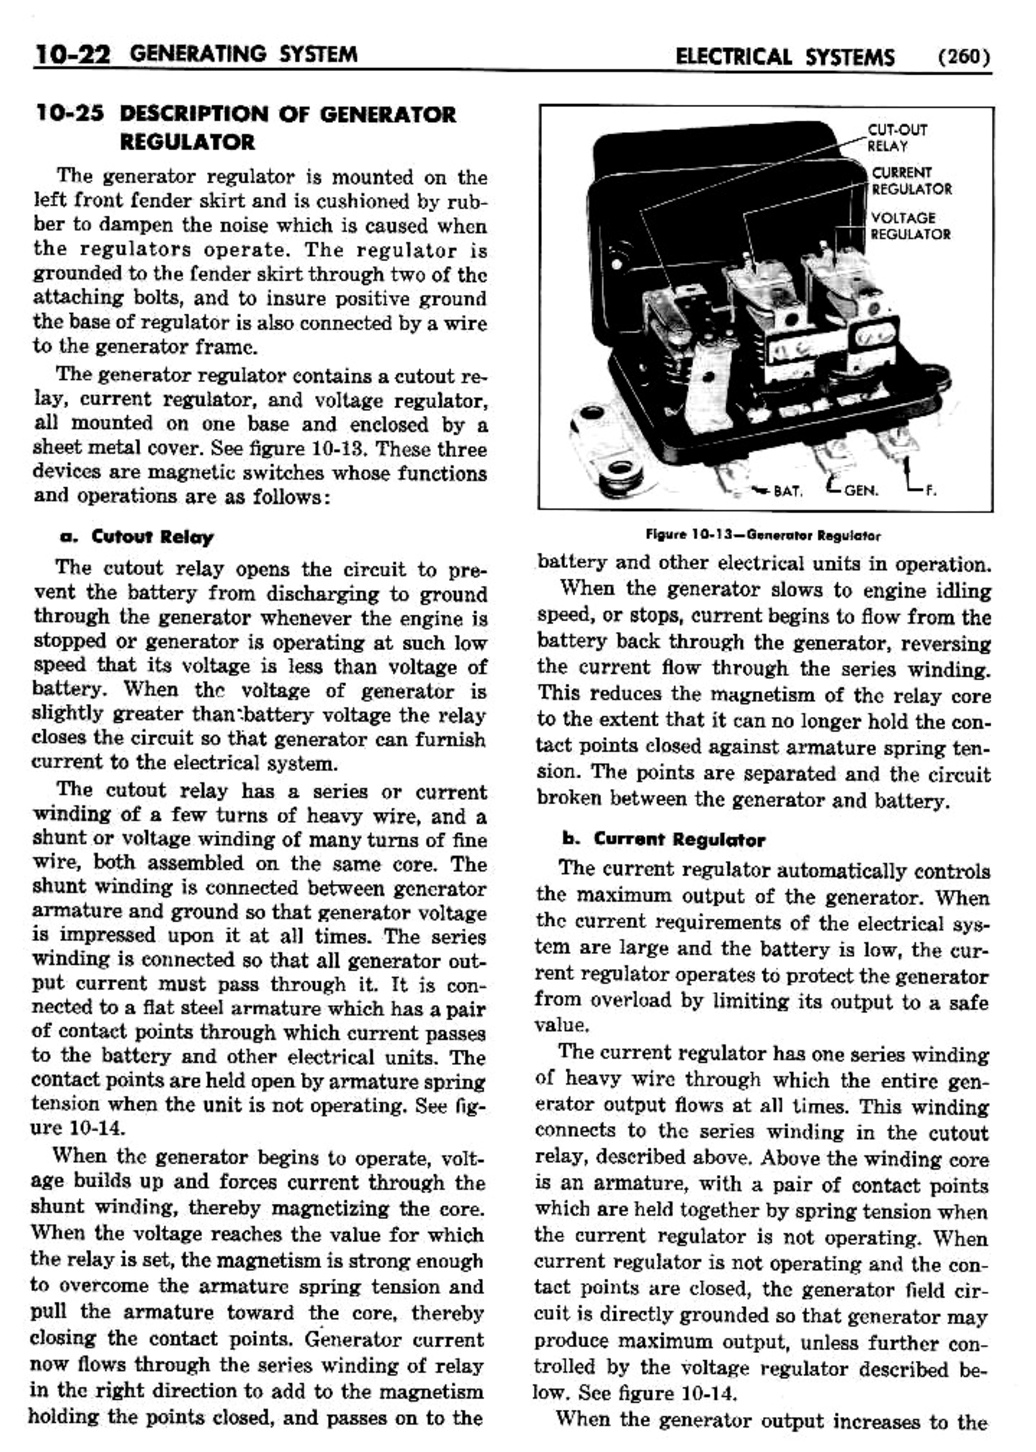 n_11 1950 Buick Shop Manual - Electrical Systems-022-022.jpg